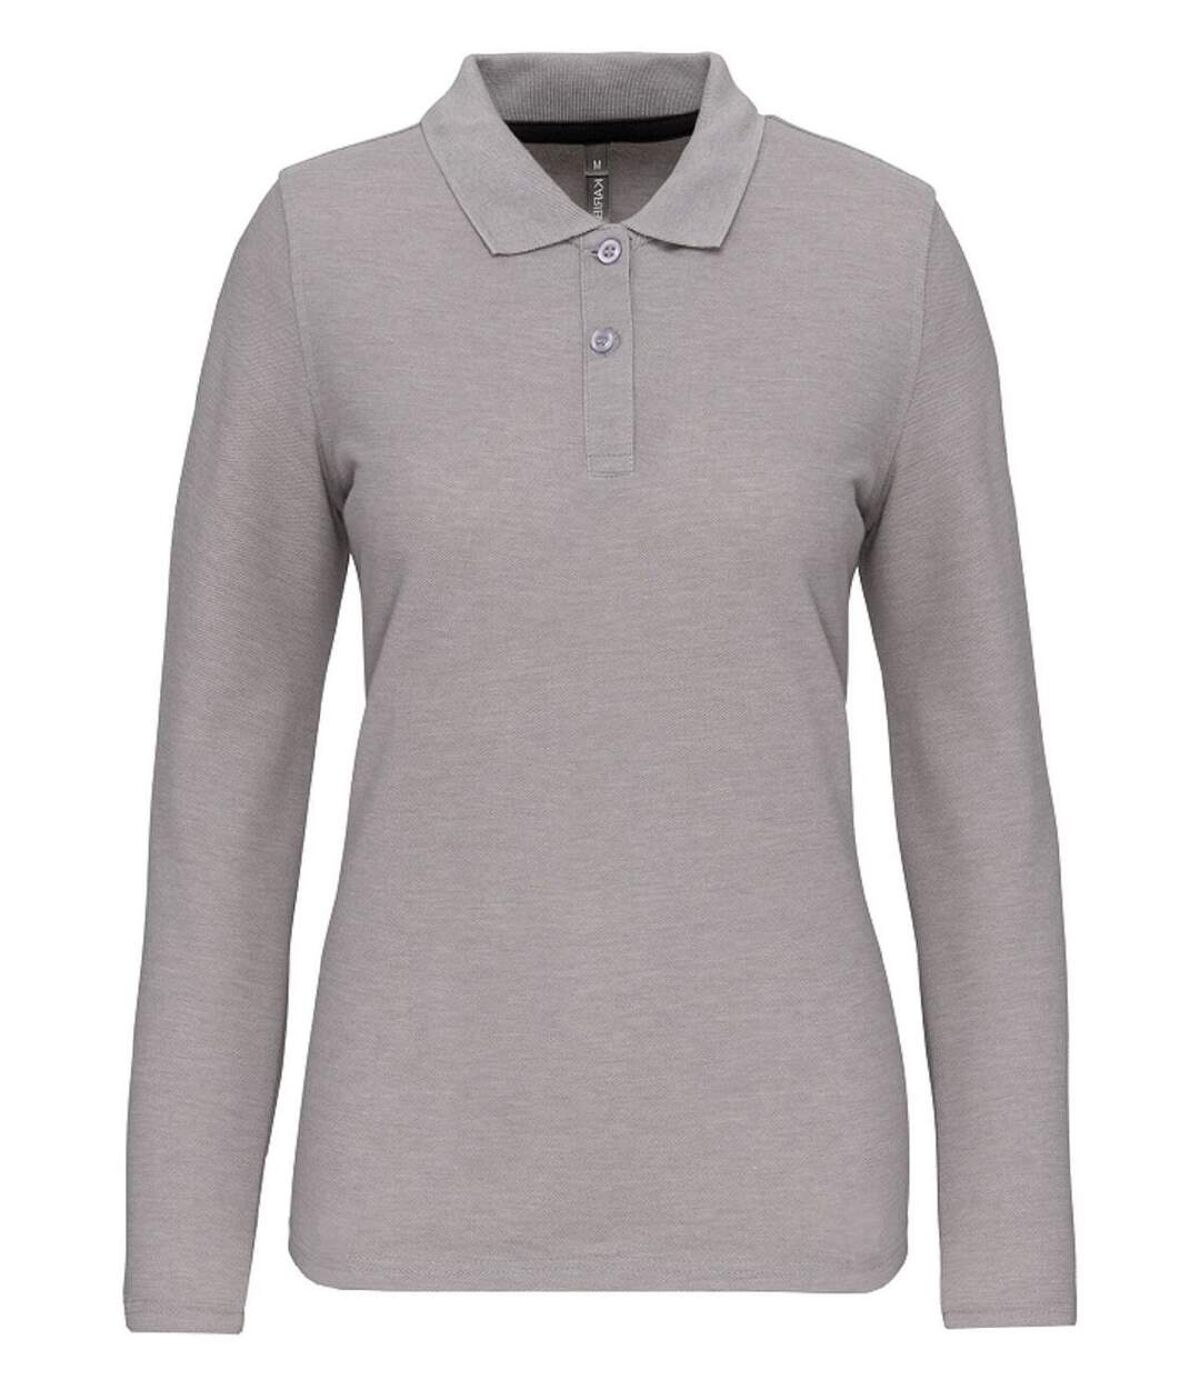 Polo manches longues - Femme - WK277 - gris oxford